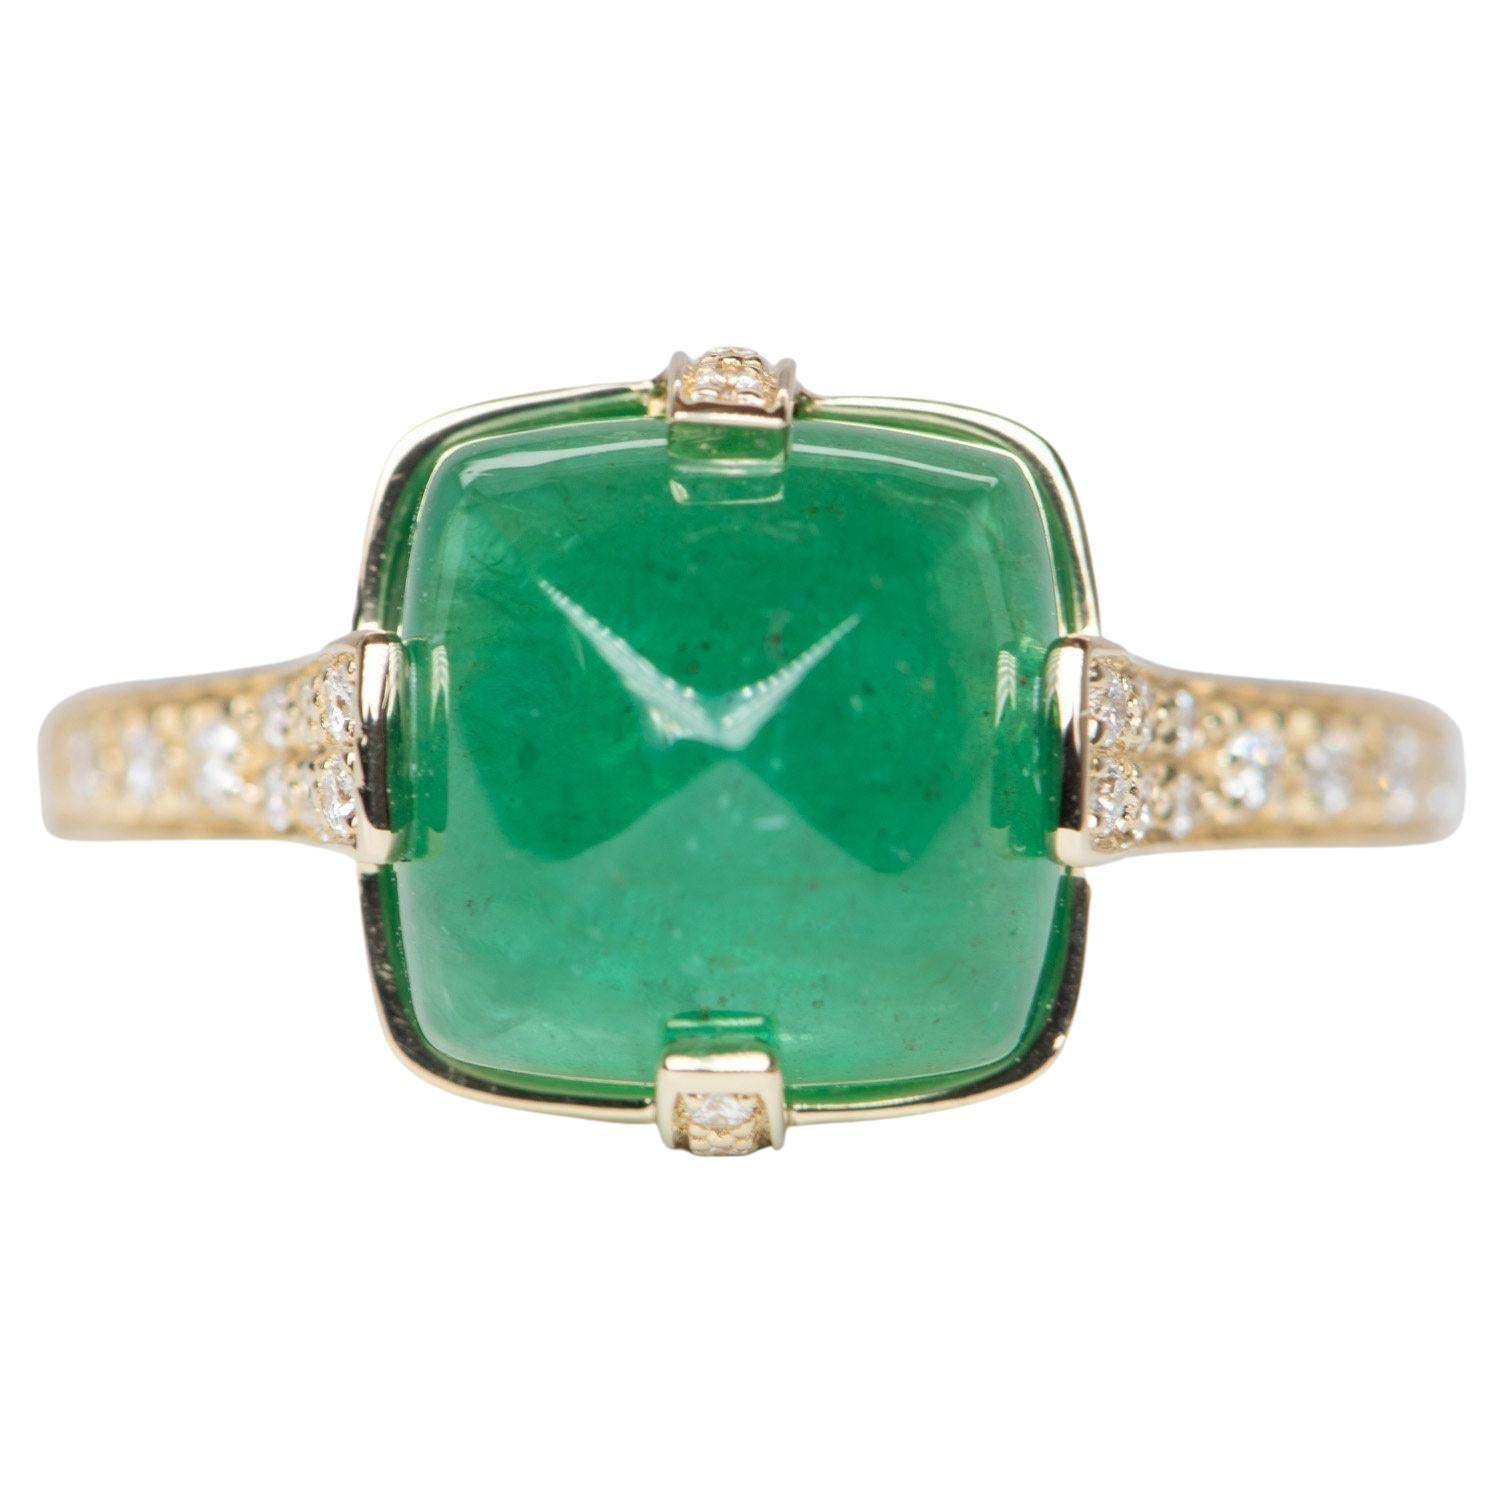 5.24ct Sugarloaf Emerald with Diamond Prongs Pave Band 14K Gold Statement Ring